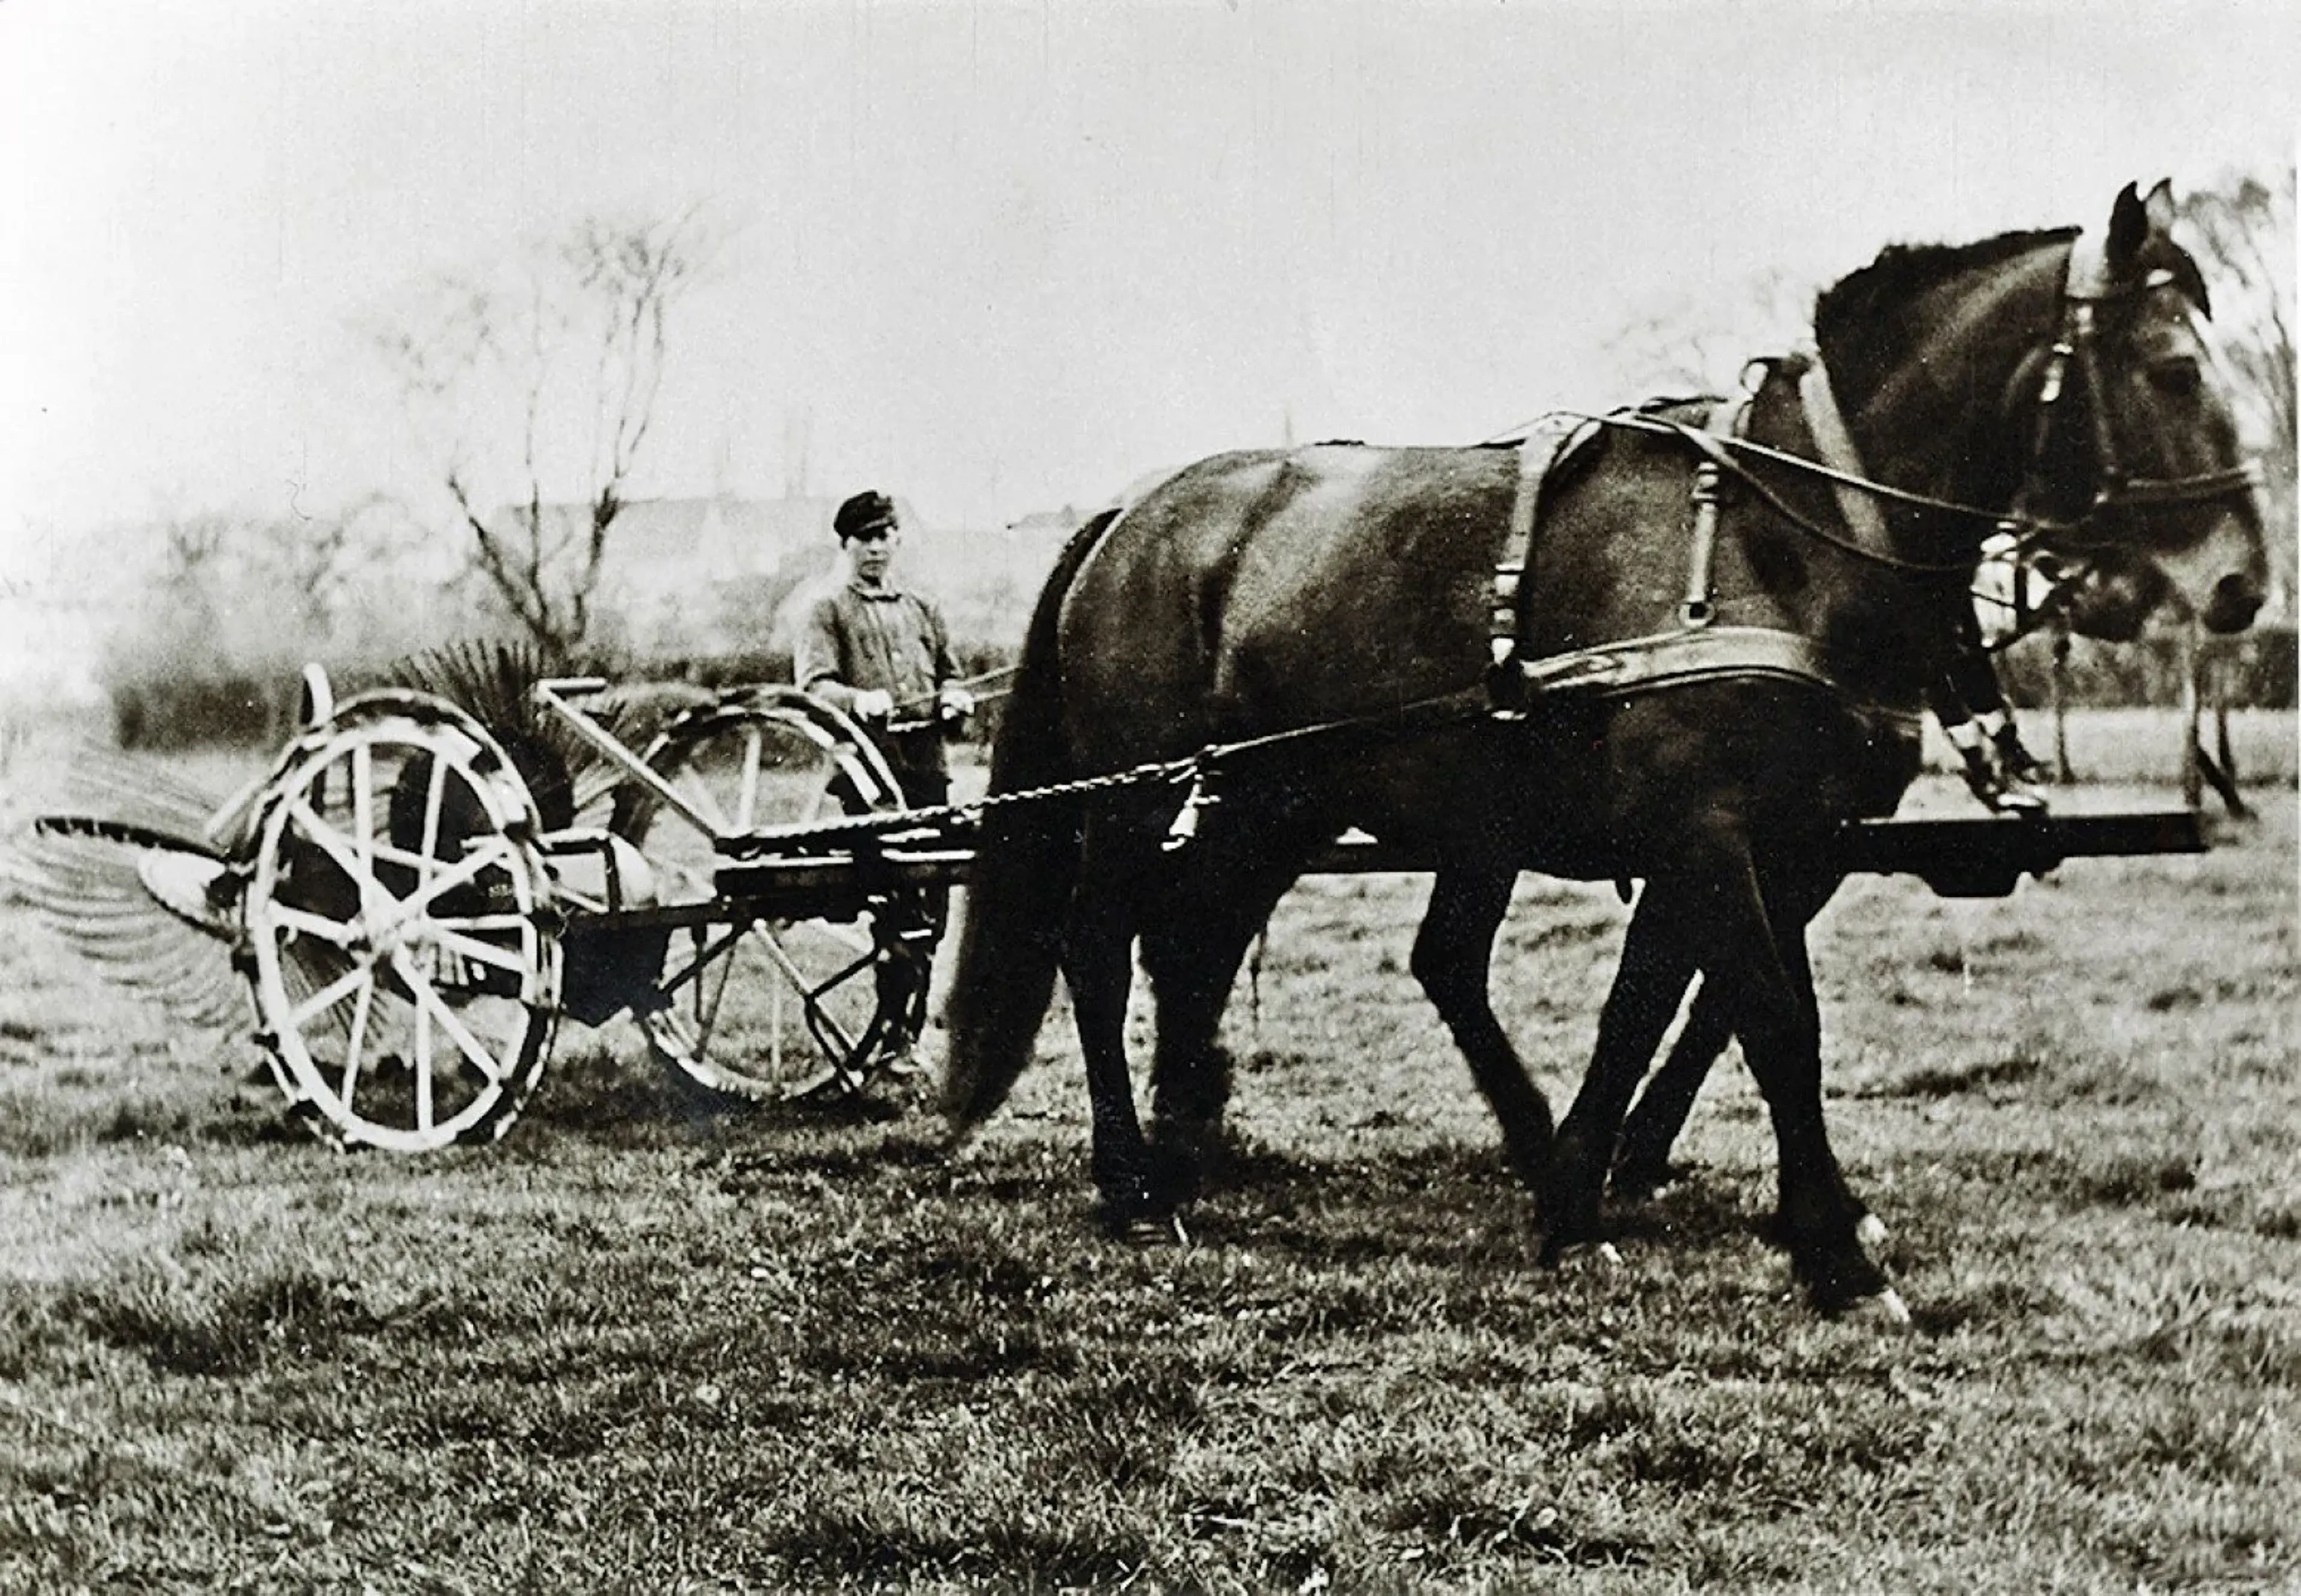 Historical photo of a farmer with a horse-drawn potato harvester.